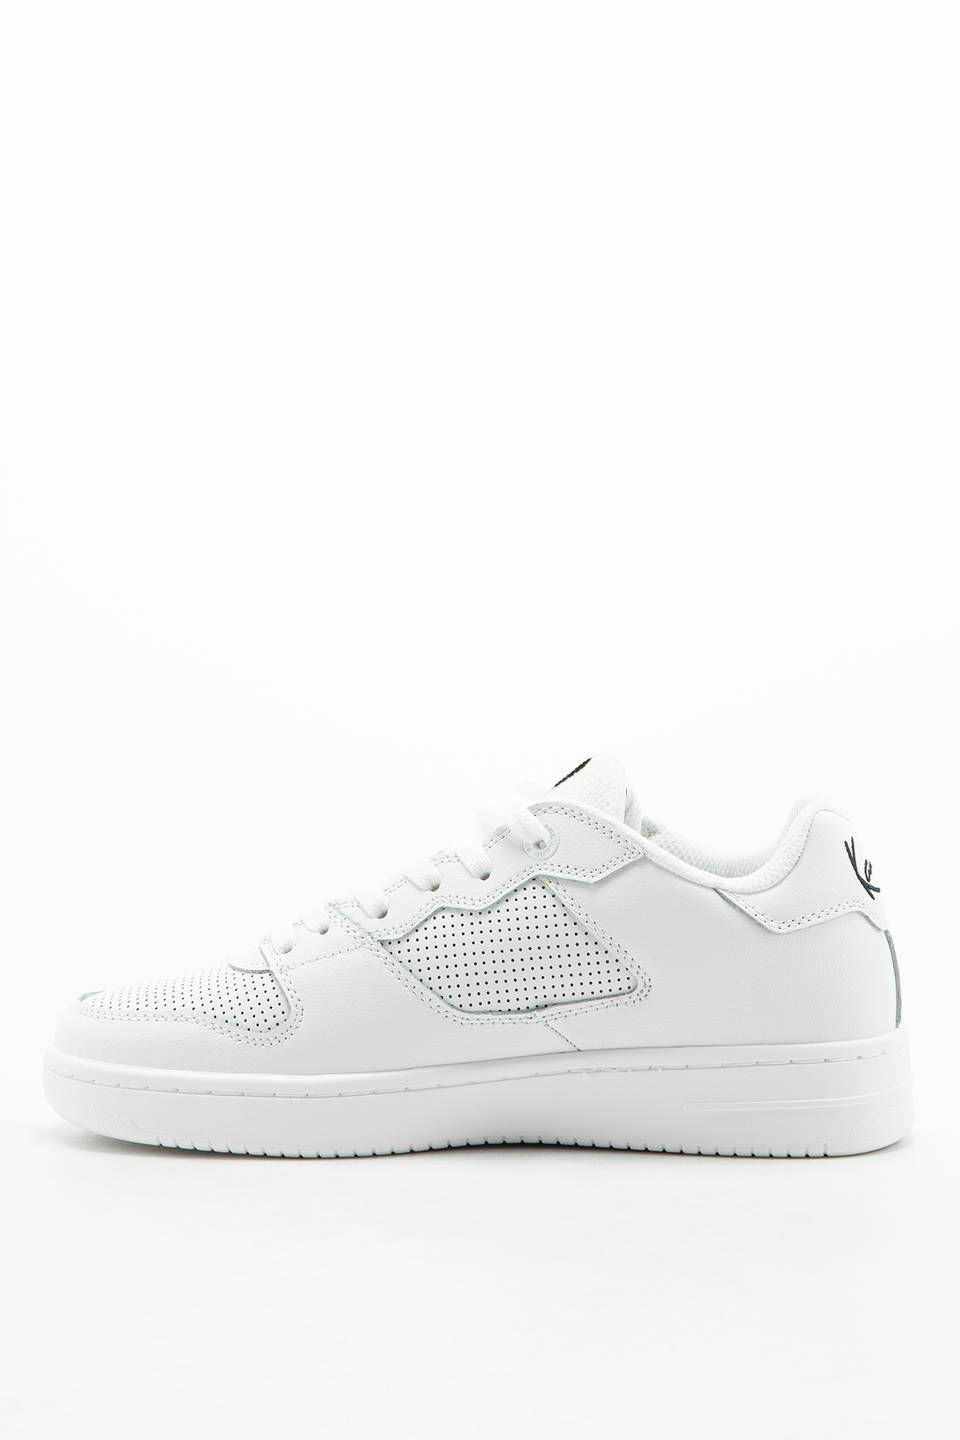 Sneakers Karl Kani 89 Classic white/total eclipse 1080976